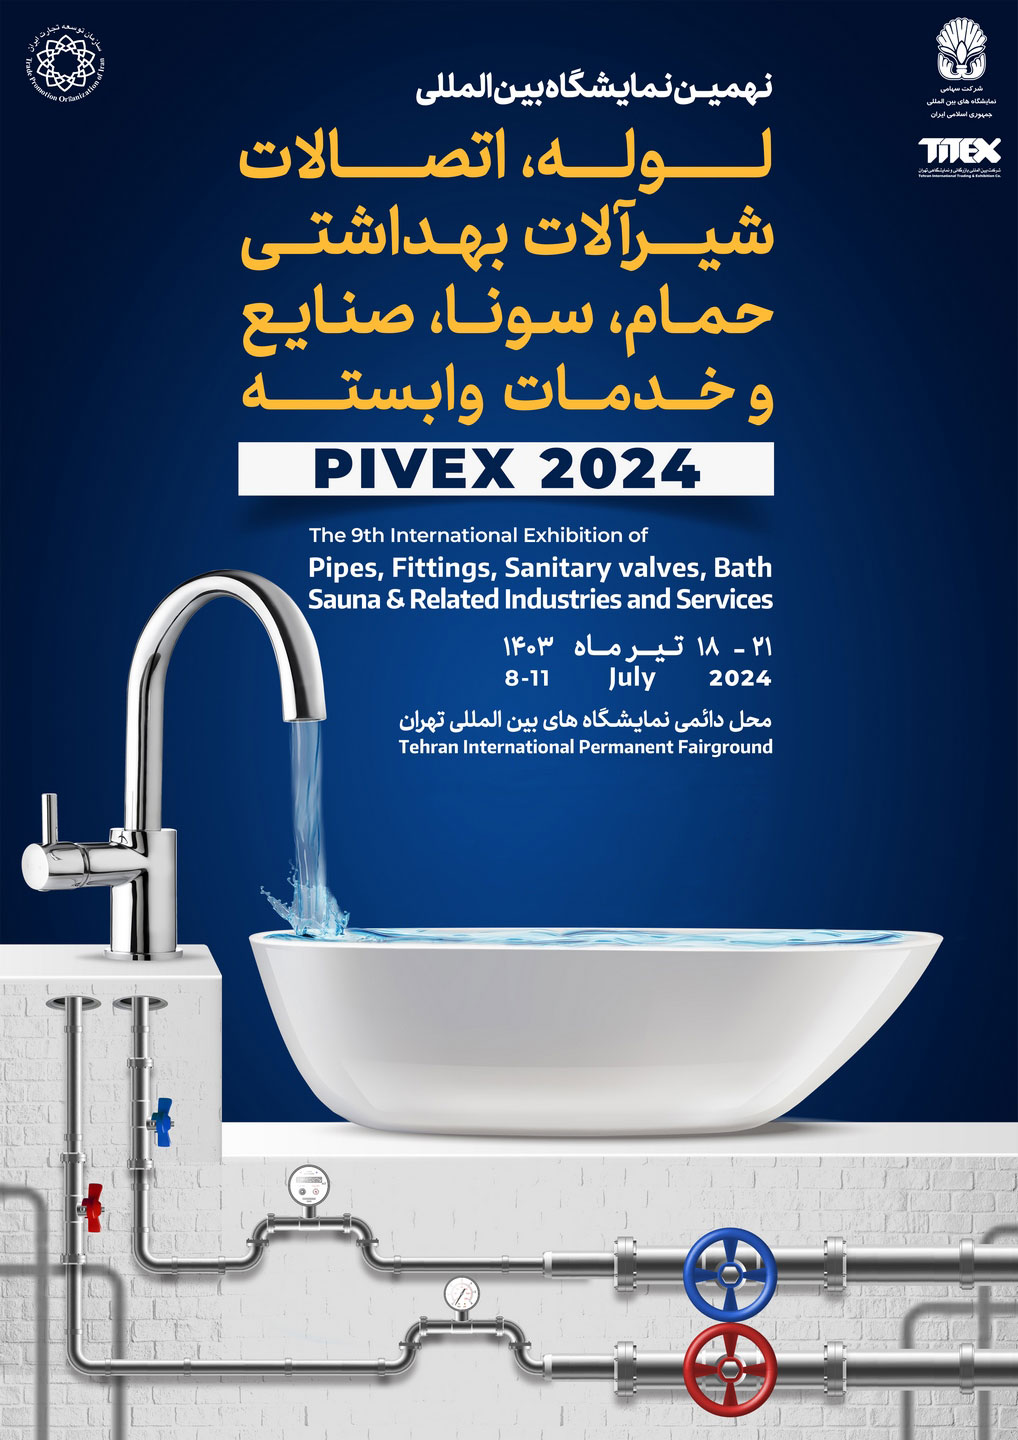 iran pivex 2024 poster new 02 - The 9th International Pipes, Fittings & Sanitary Valves Exhibition 2024 in Iran/Tehran